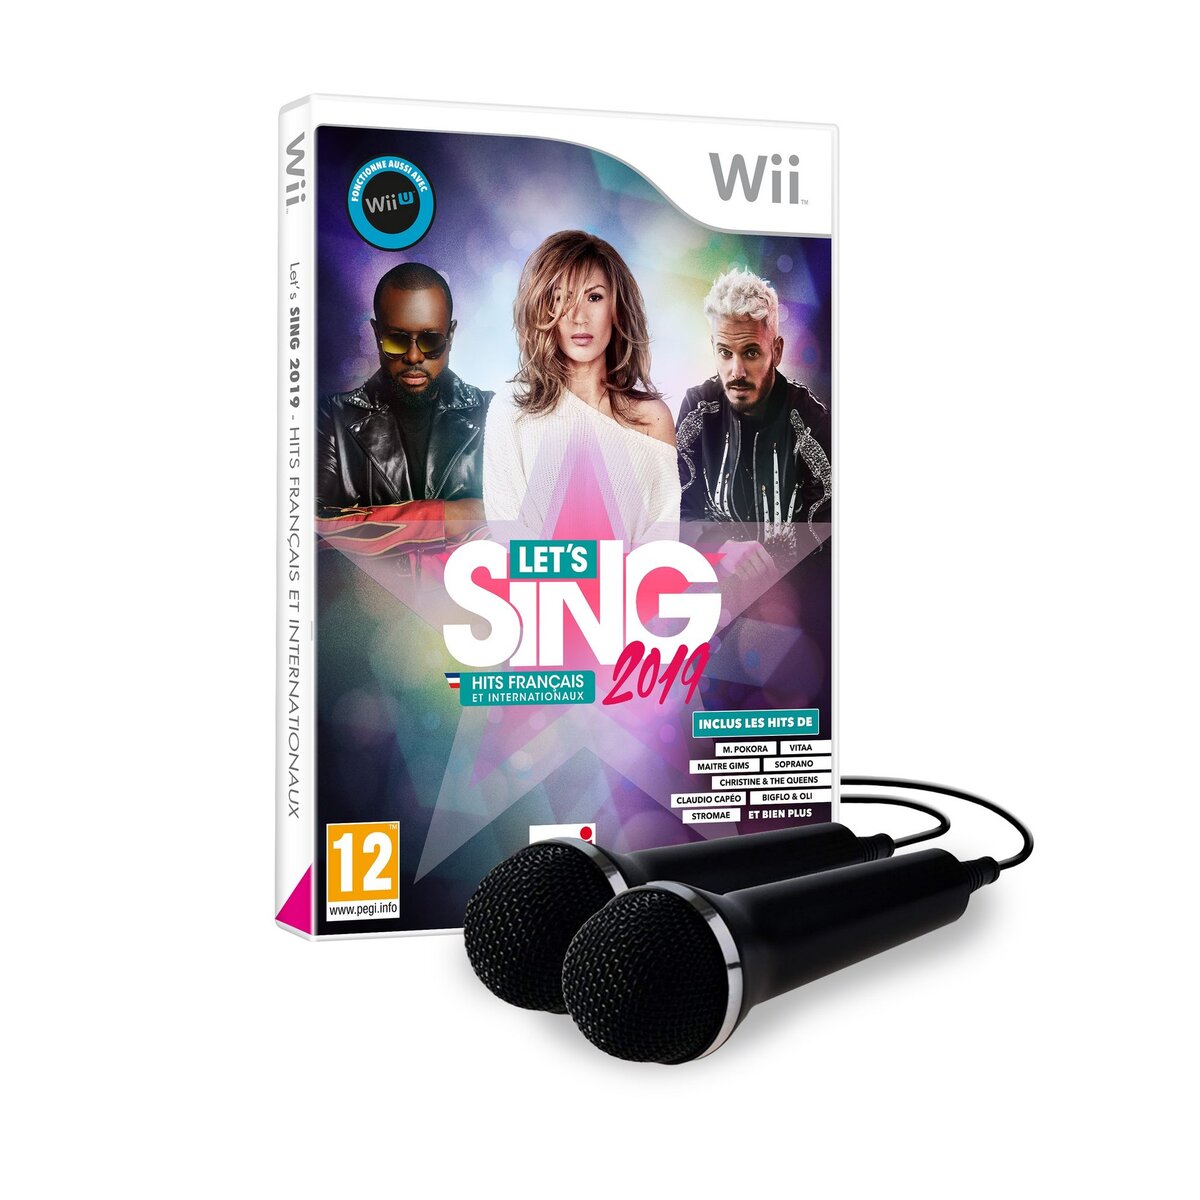 Let's Sing 2019 + 2 micros Wii